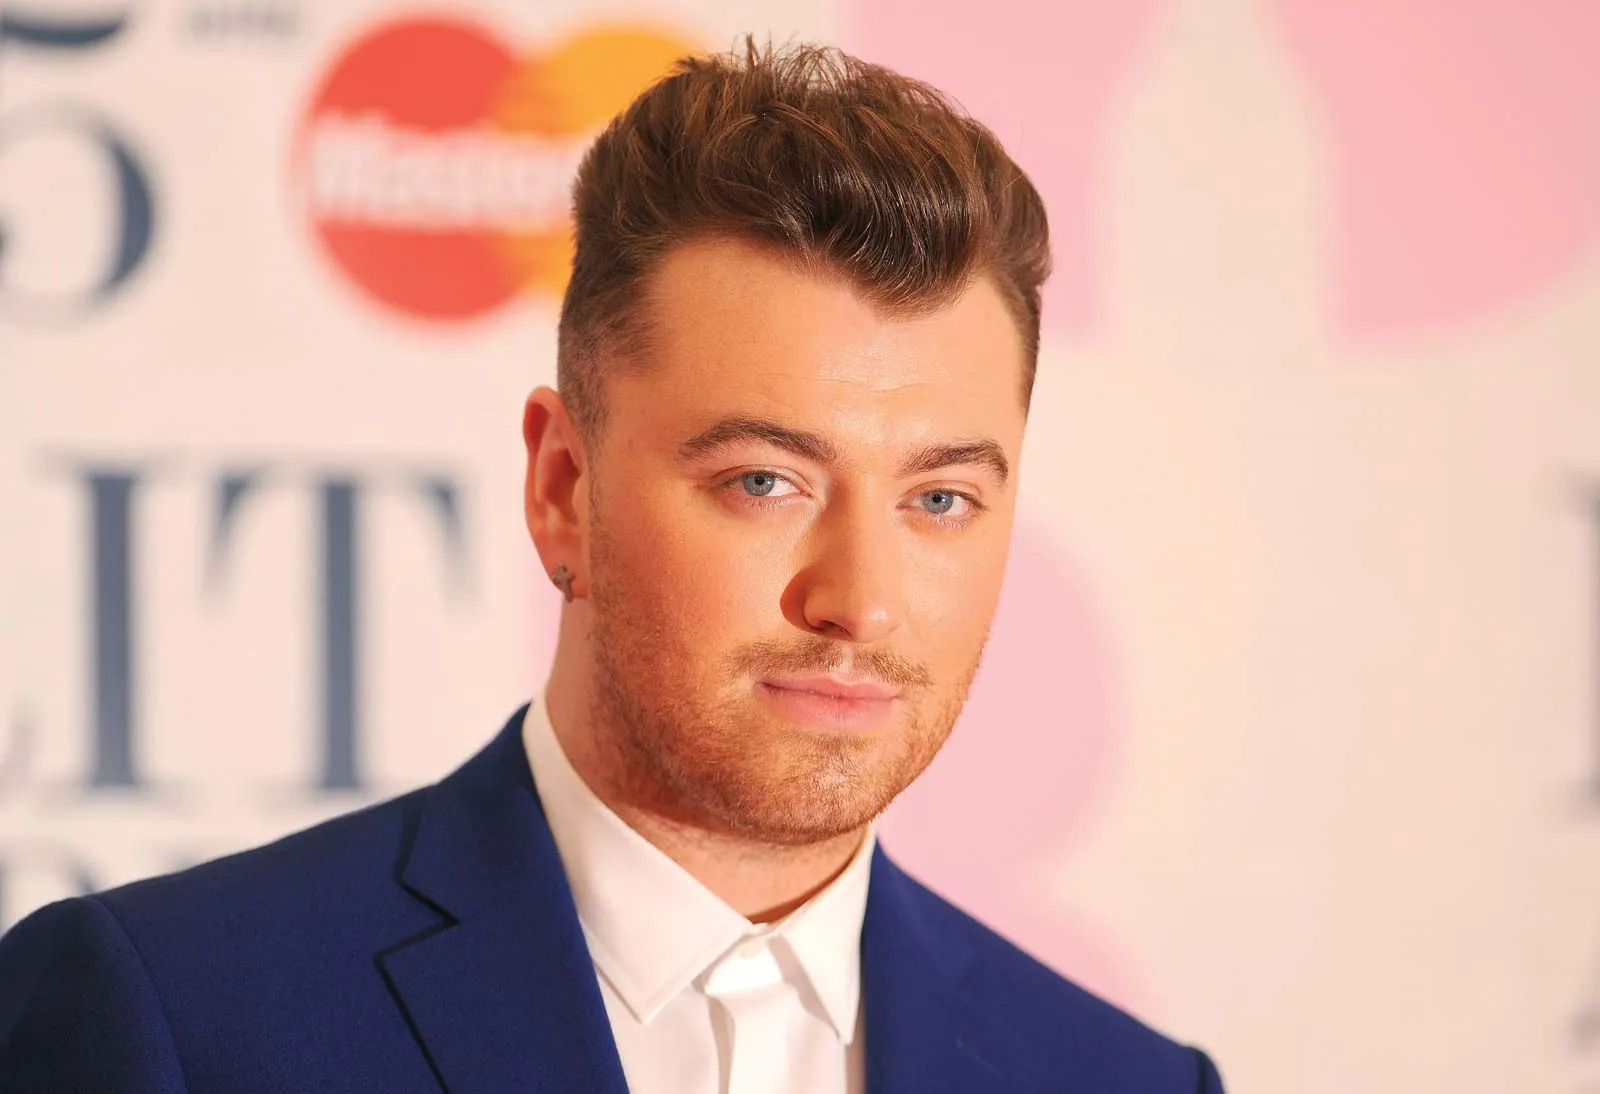 Who Is Sam Smith, The Singer?